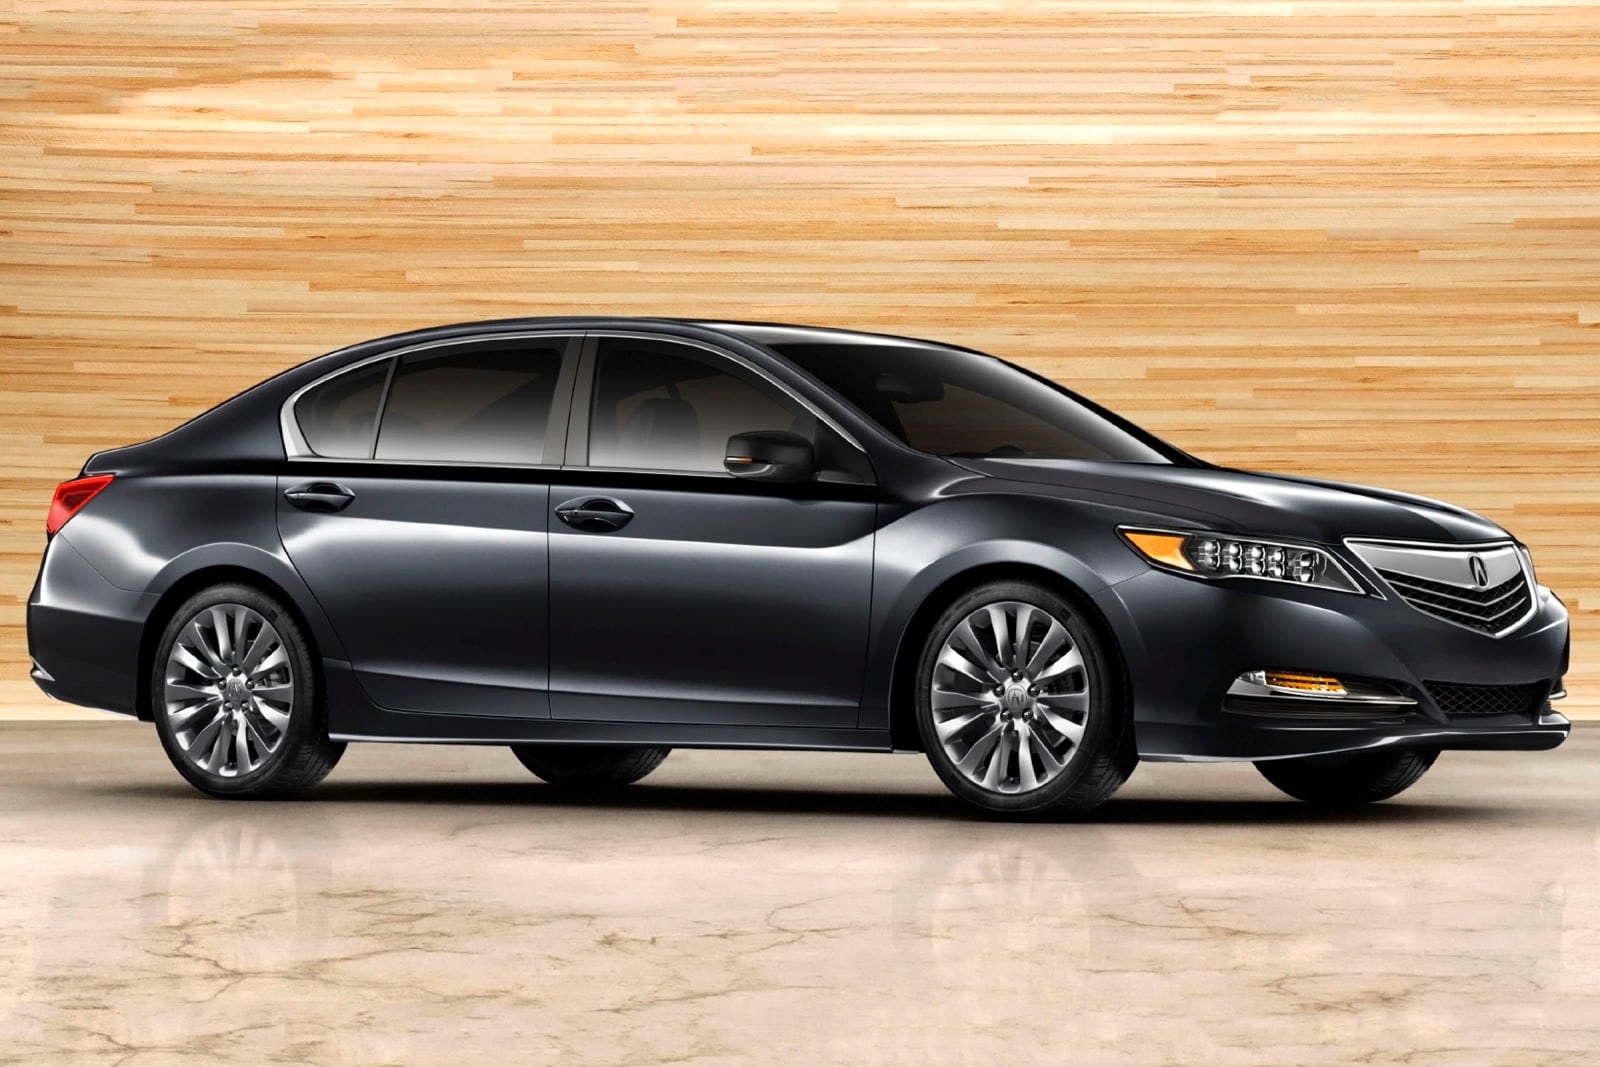 2015 Acura RLX Review & Ratings | Edmunds